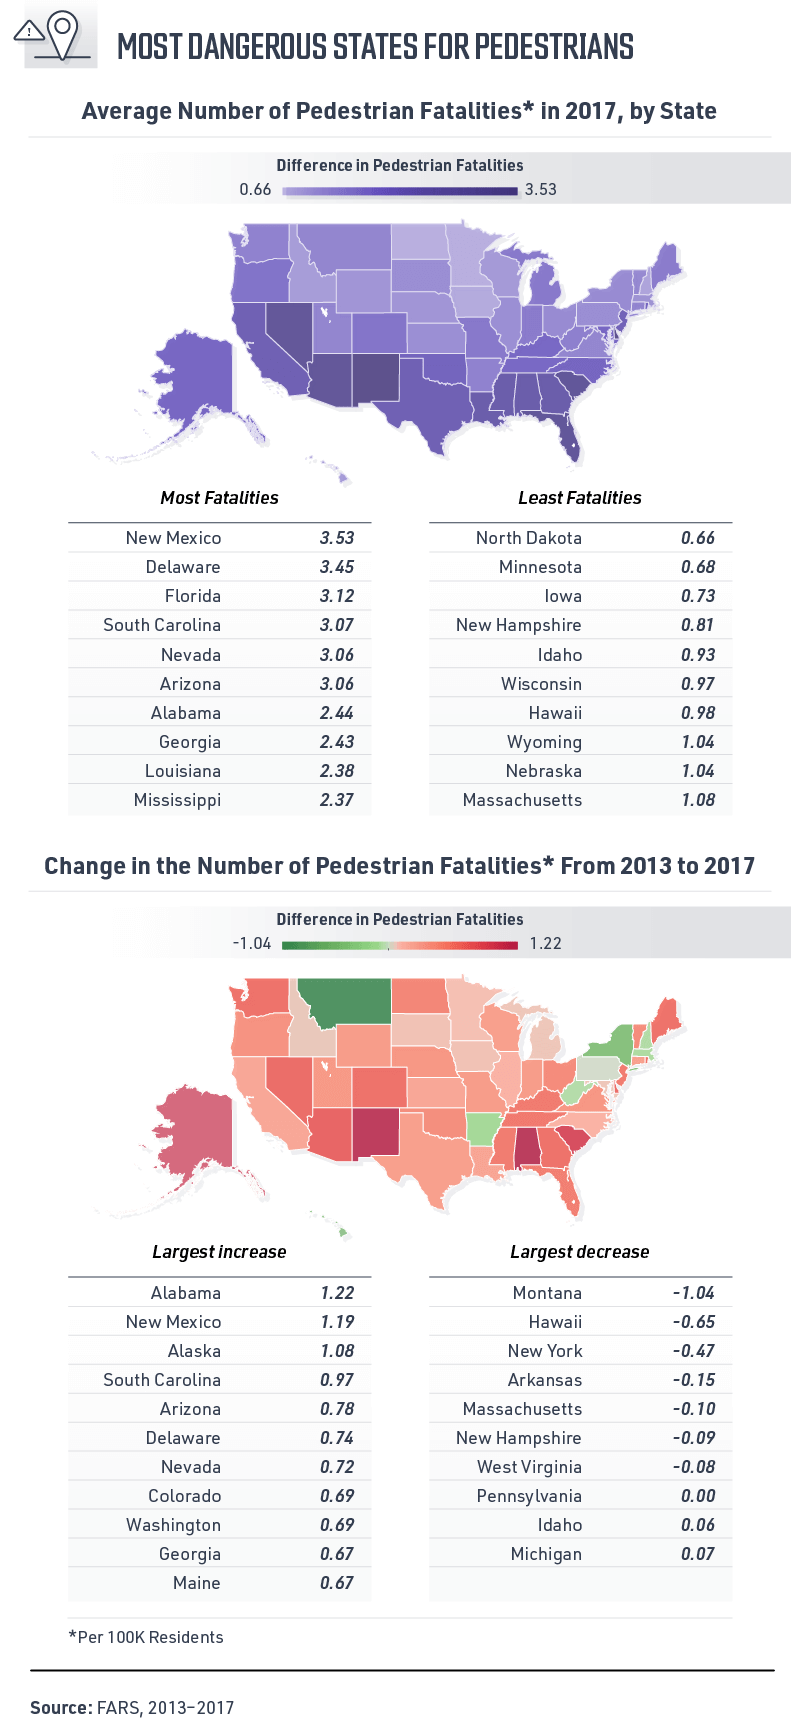 The top 5 most dangerous states for pedestrians are New Mexico, Delaware, Florida, South Carolina, and Nevada. Whereas, the least dangerous states for pedestrians are North Dakota, Minnesota, Iowa, New Hampshire, and Idaho. The most dangerous states for pedestrians were over three times ass dangerous than the safest ones. From 2013-2017, a few states saw a decrease in pedestrian deaths: Montana, Hawaii, and New York saw a decrease in pedestrians deaths by .05 to one death per 100,000 residents. 